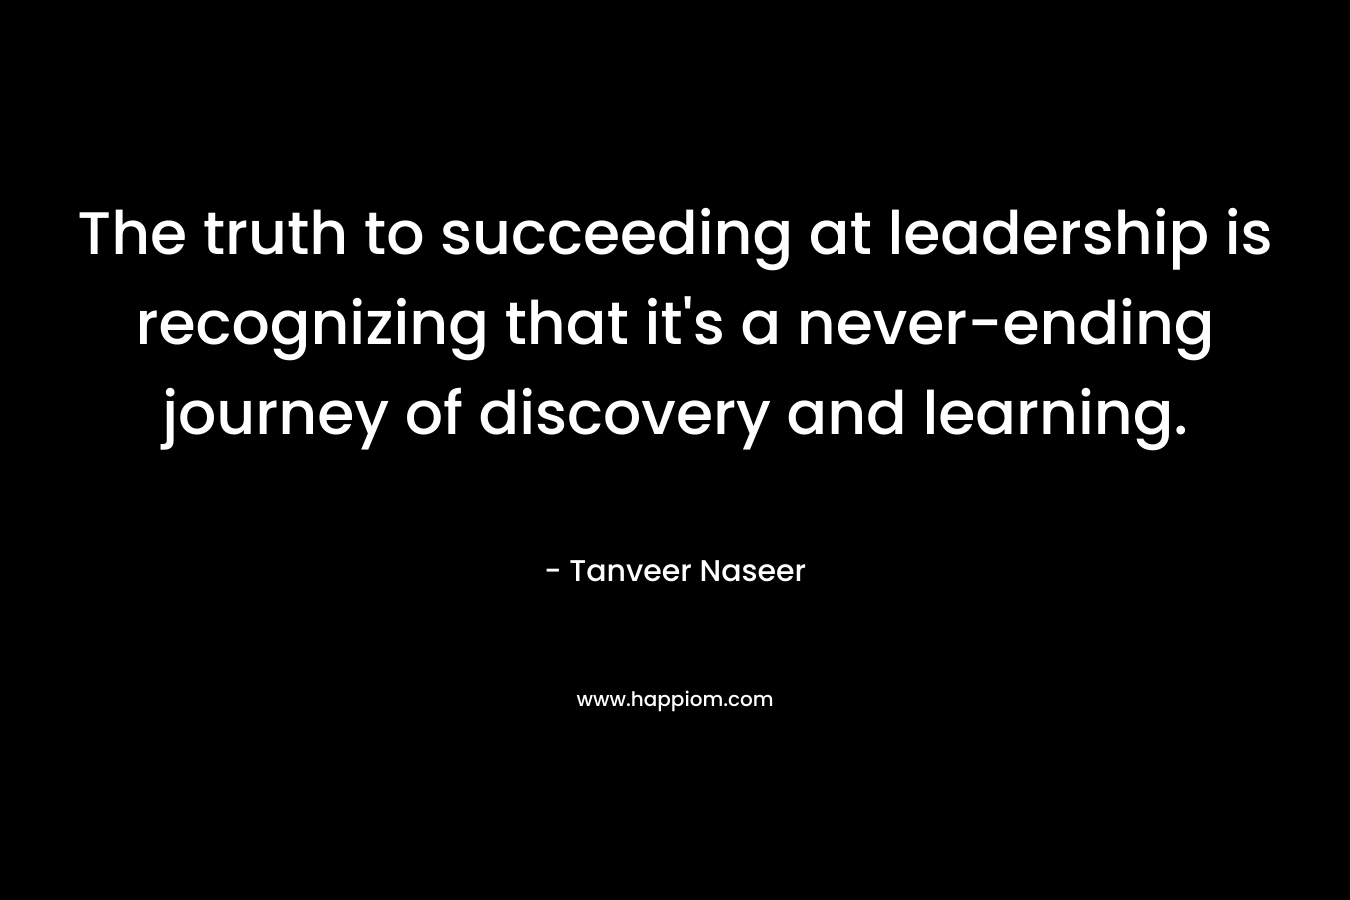 The truth to succeeding at leadership is recognizing that it’s a never-ending journey of discovery and learning. – Tanveer Naseer